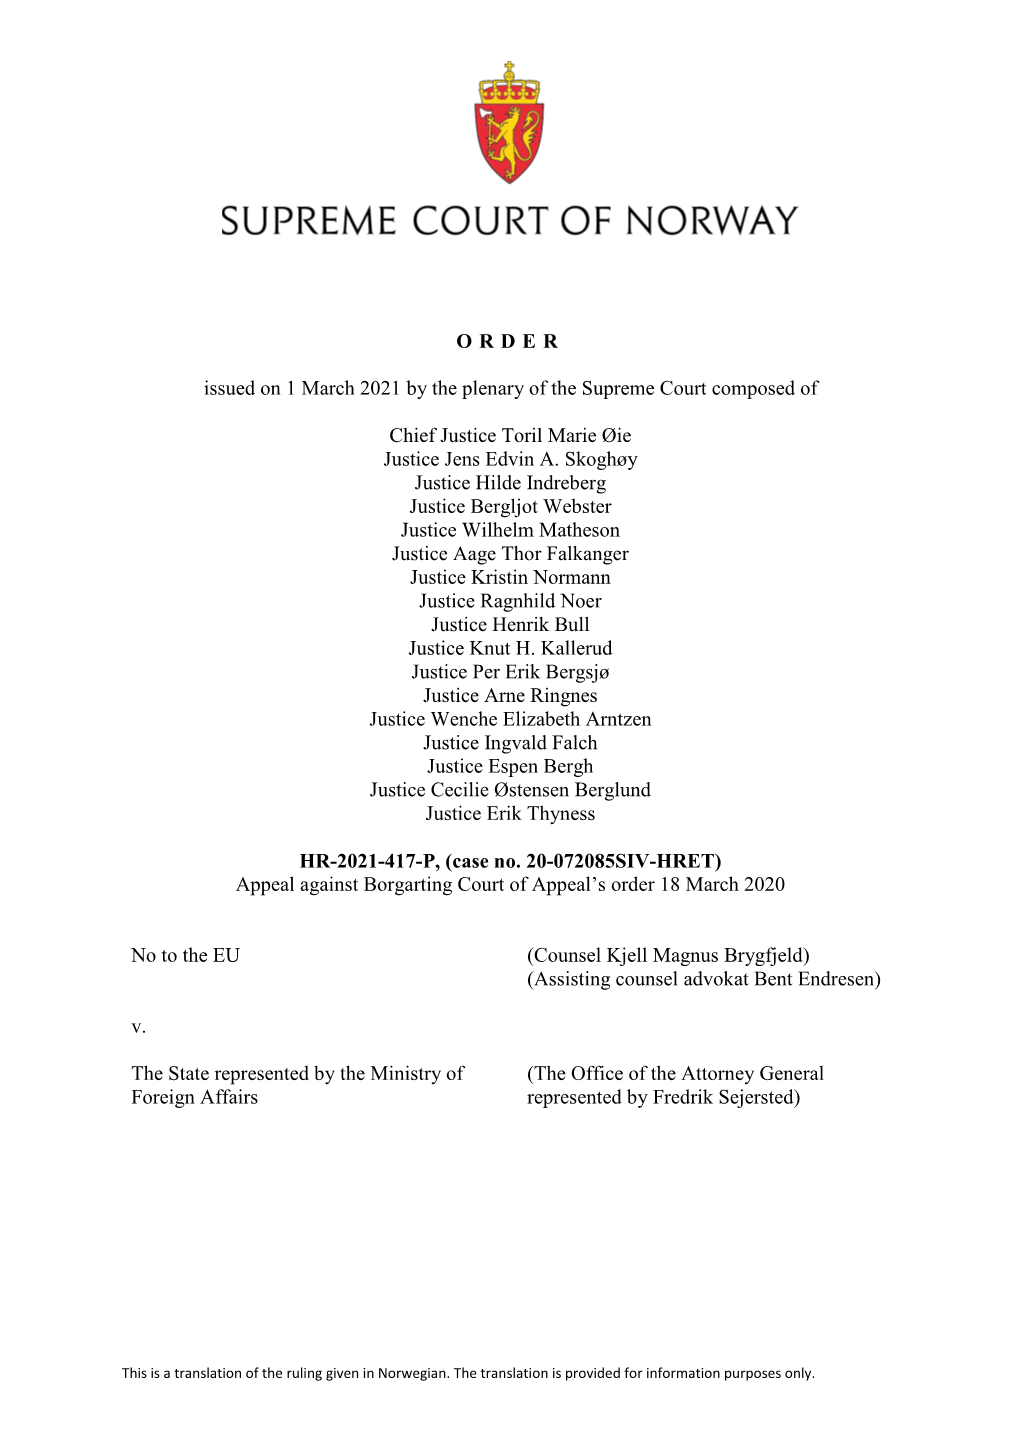 ORDER Issued on 1 March 2021 by the Plenary of the Supreme Court